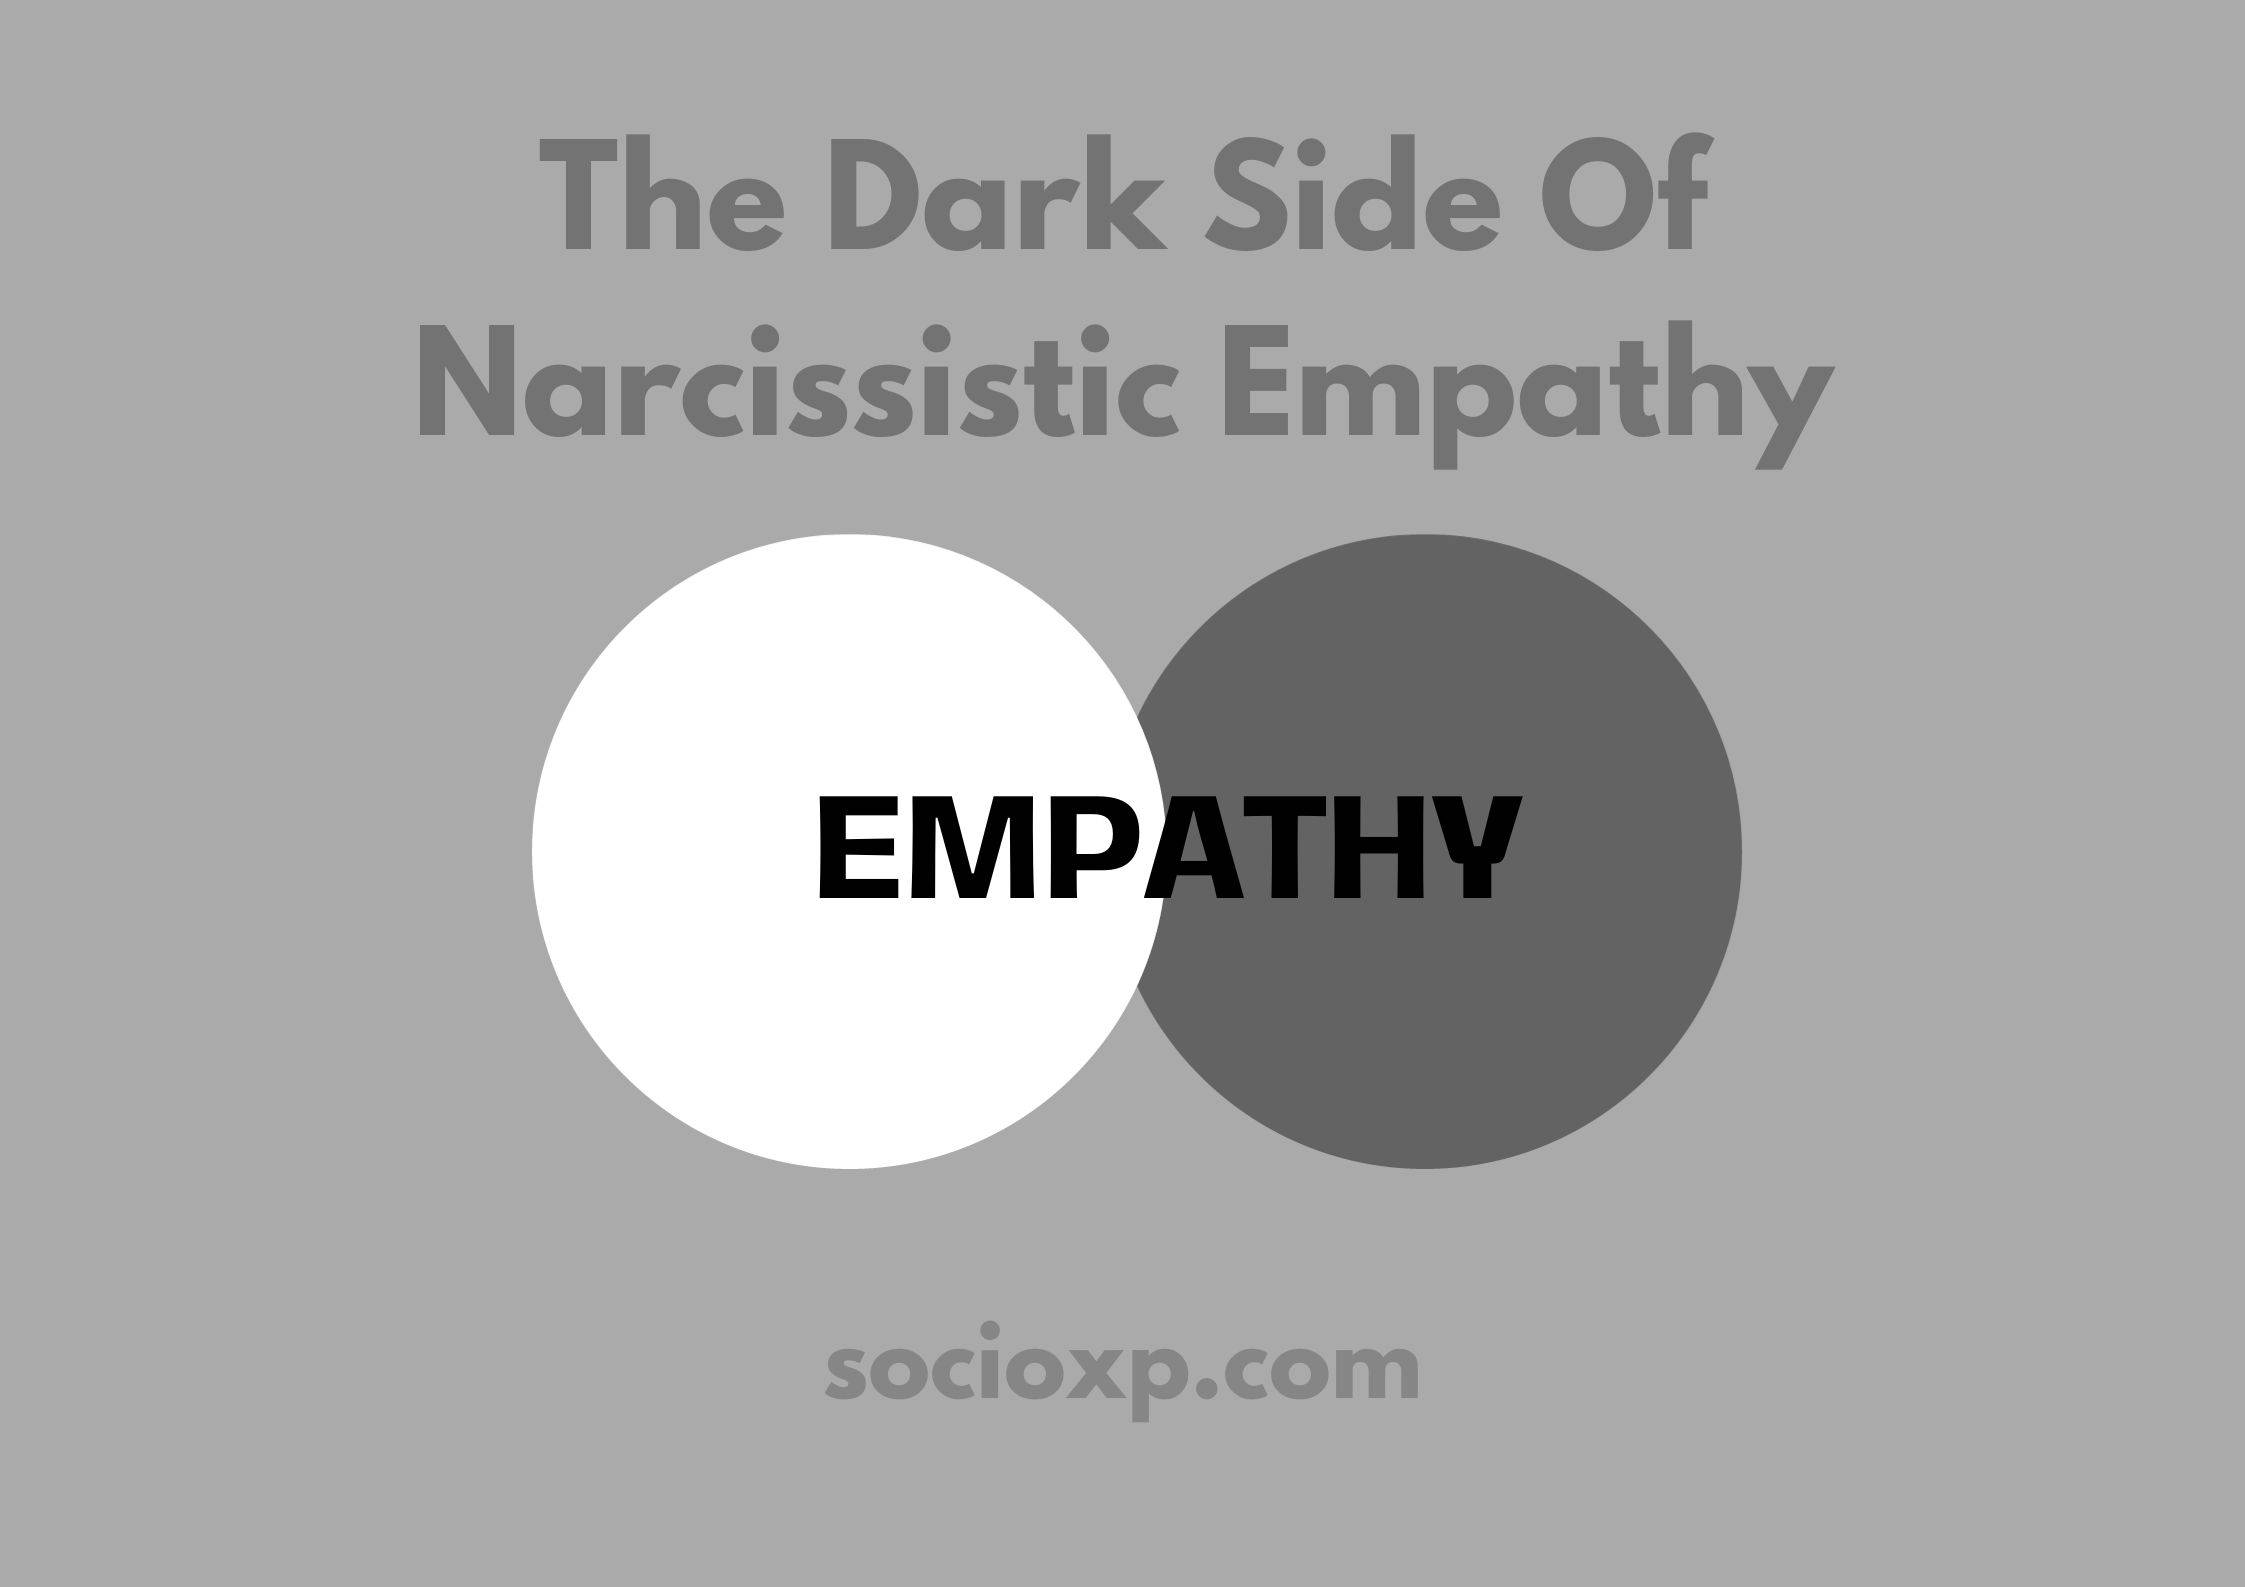 The Dark Side Of Narcissistic Empathy